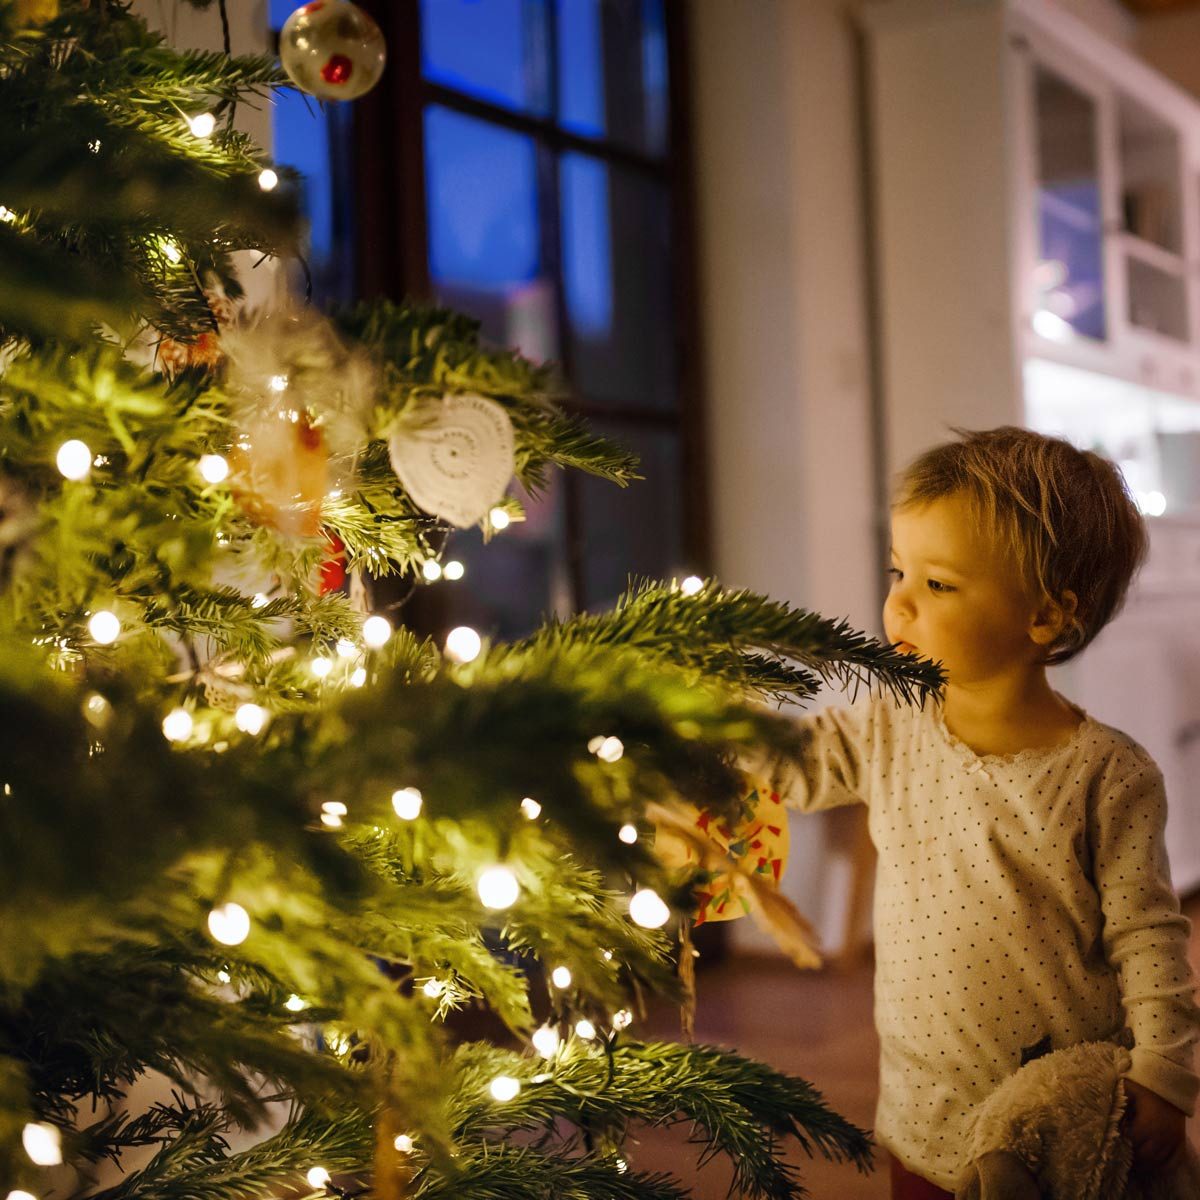 How To Keep a Christmas Tree Alive Through the Holidays